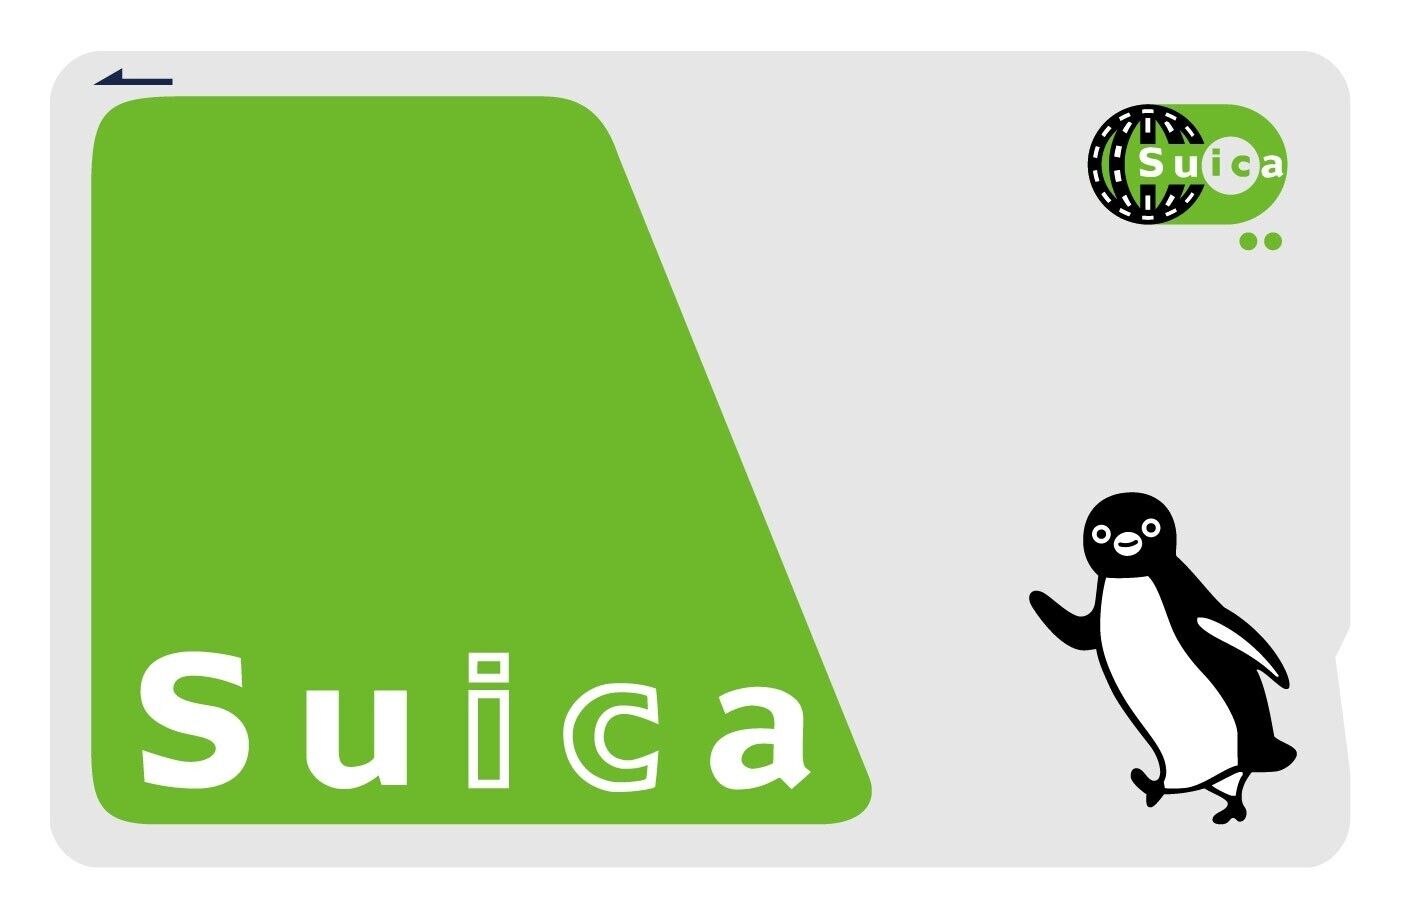 Suica Prepaid Transportation IC card JR East pre charged with ¥500 Japanese yen